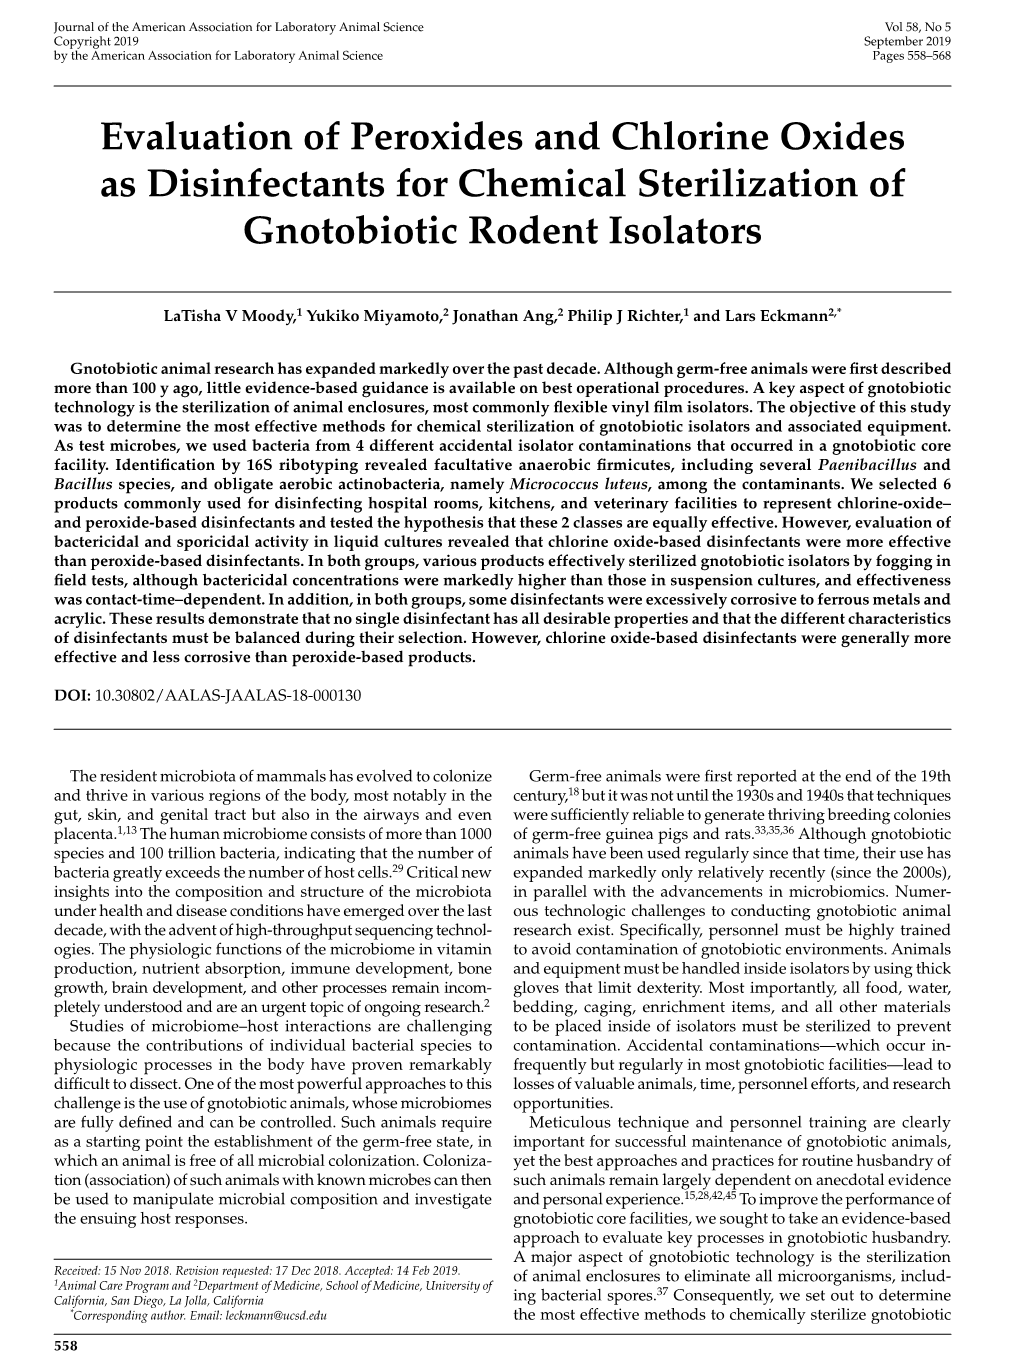 Evaluation of Peroxides and Chlorine Oxides As Disinfectants for Chemical Sterilization of Gnotobiotic Rodent Isolators